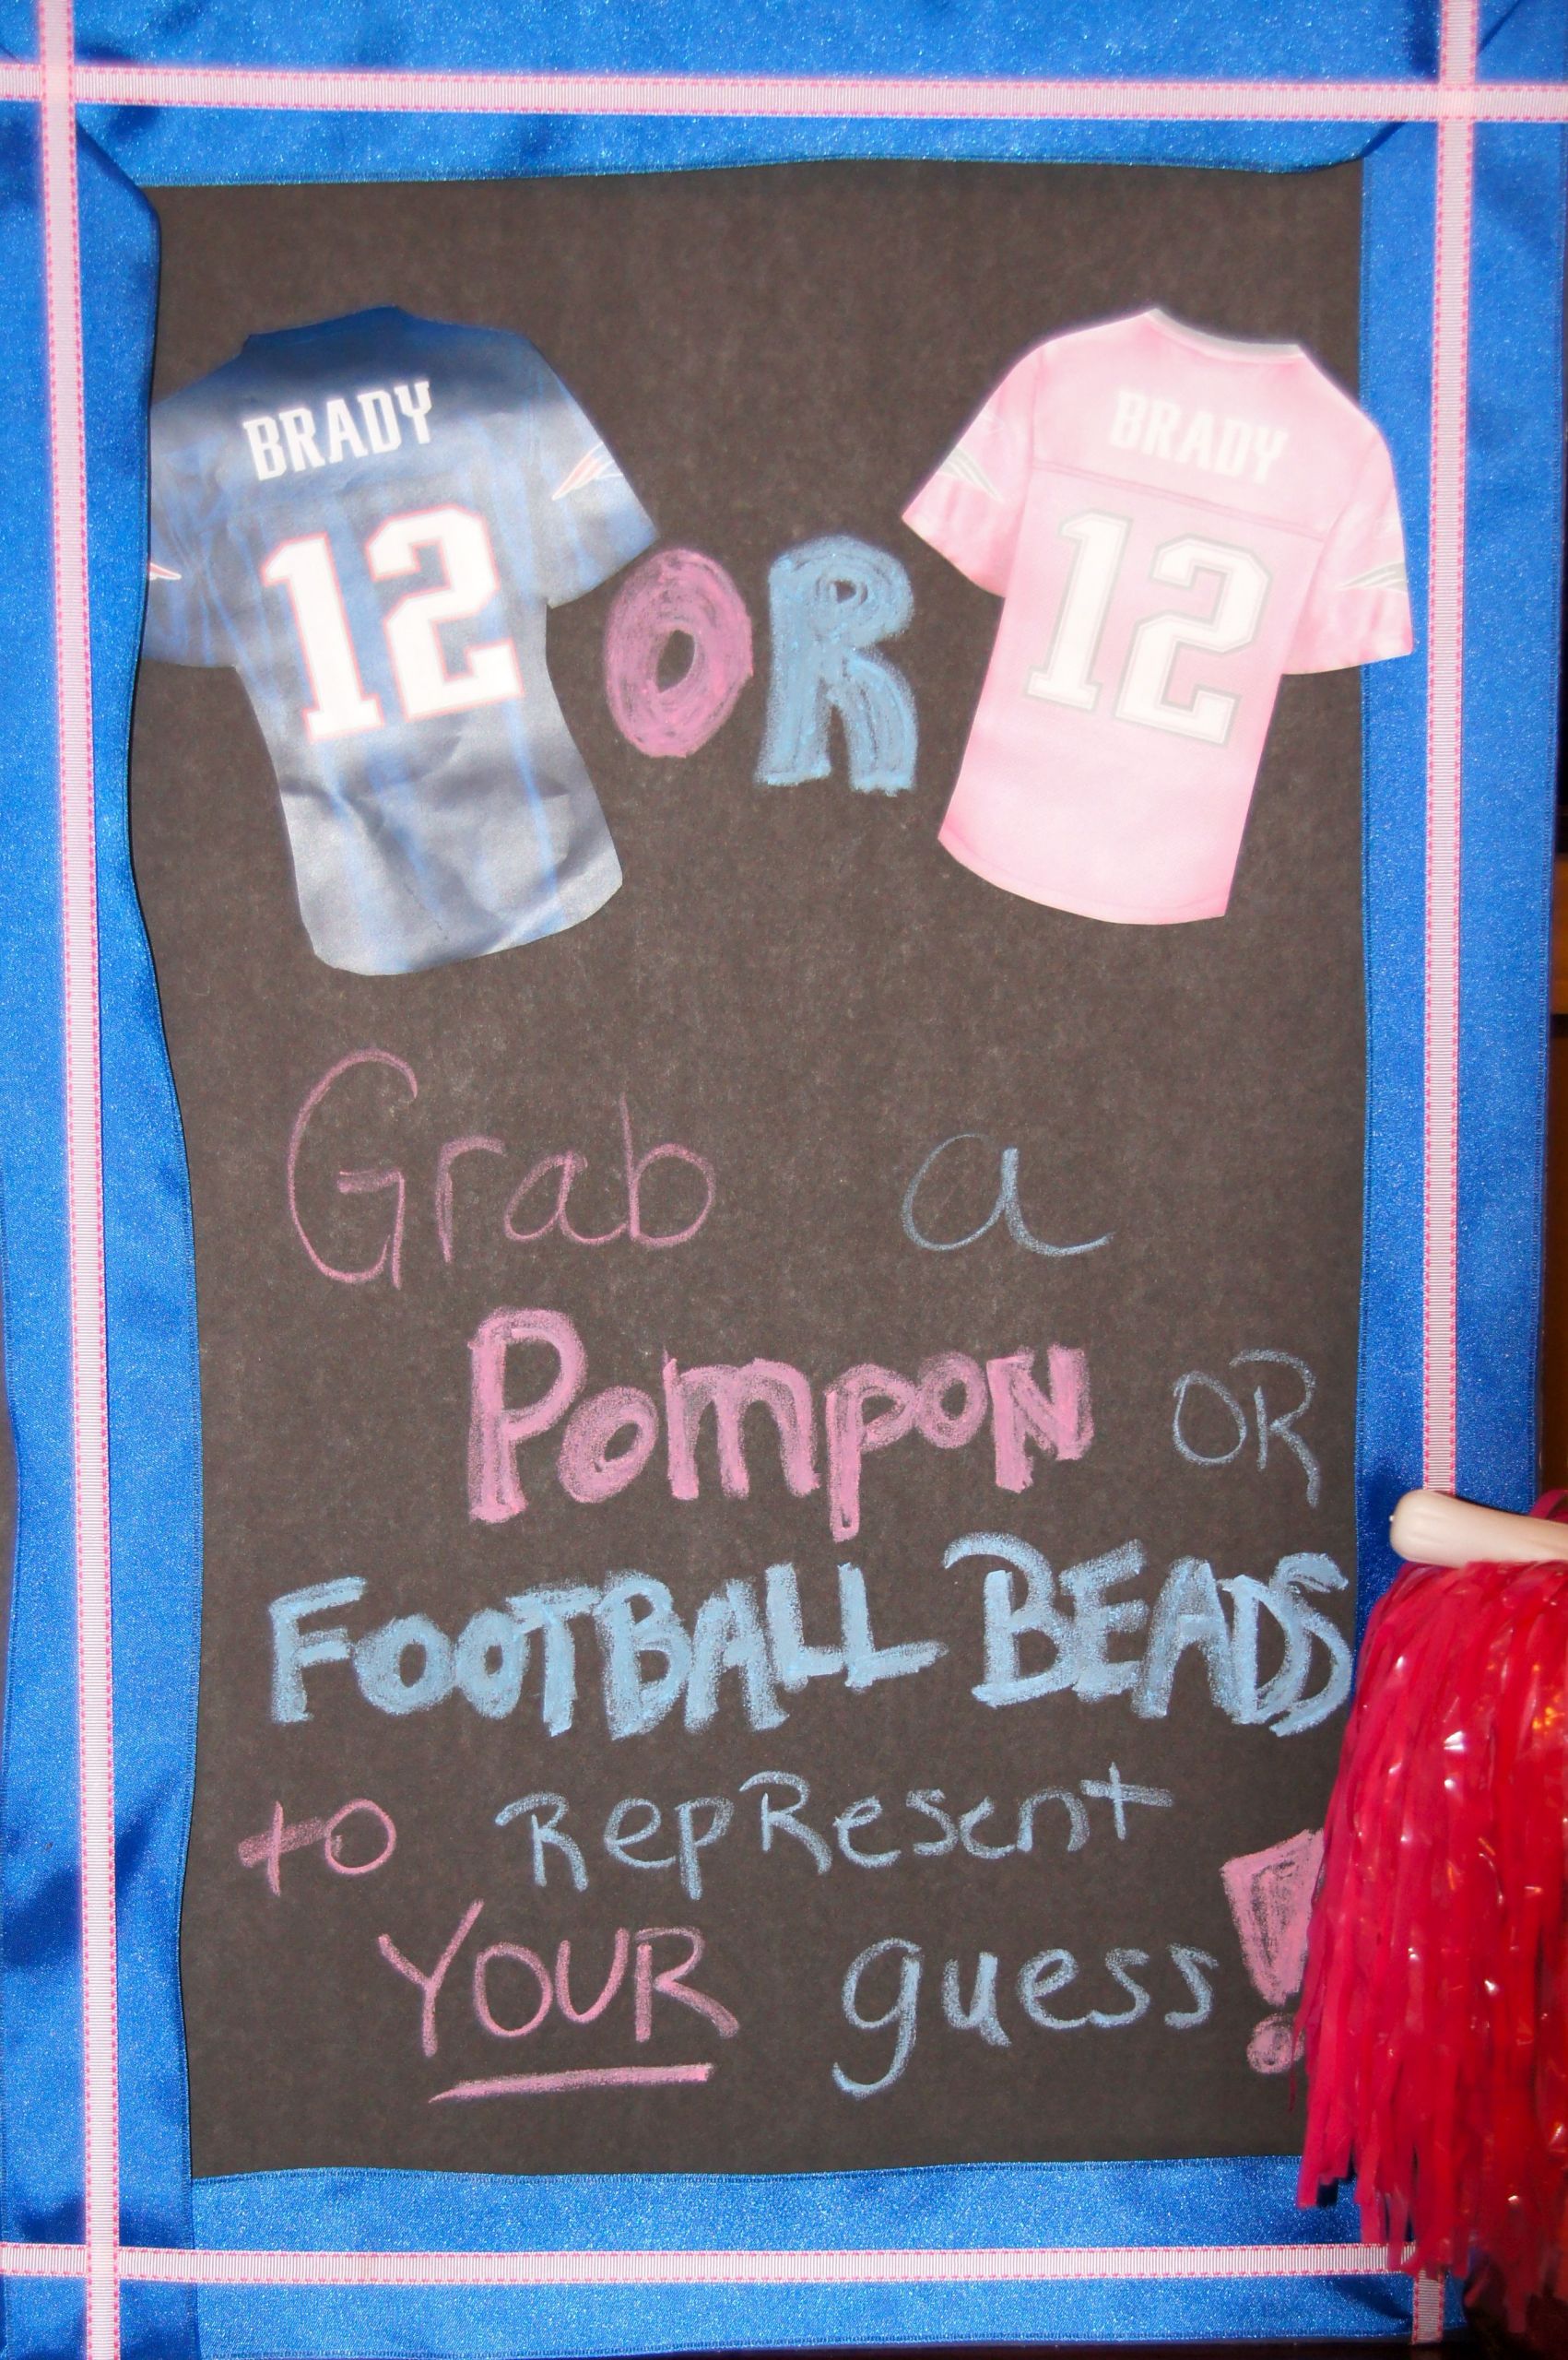 Football Themed Gender Reveal Party Ideas
 Football gender reveal patriots theme